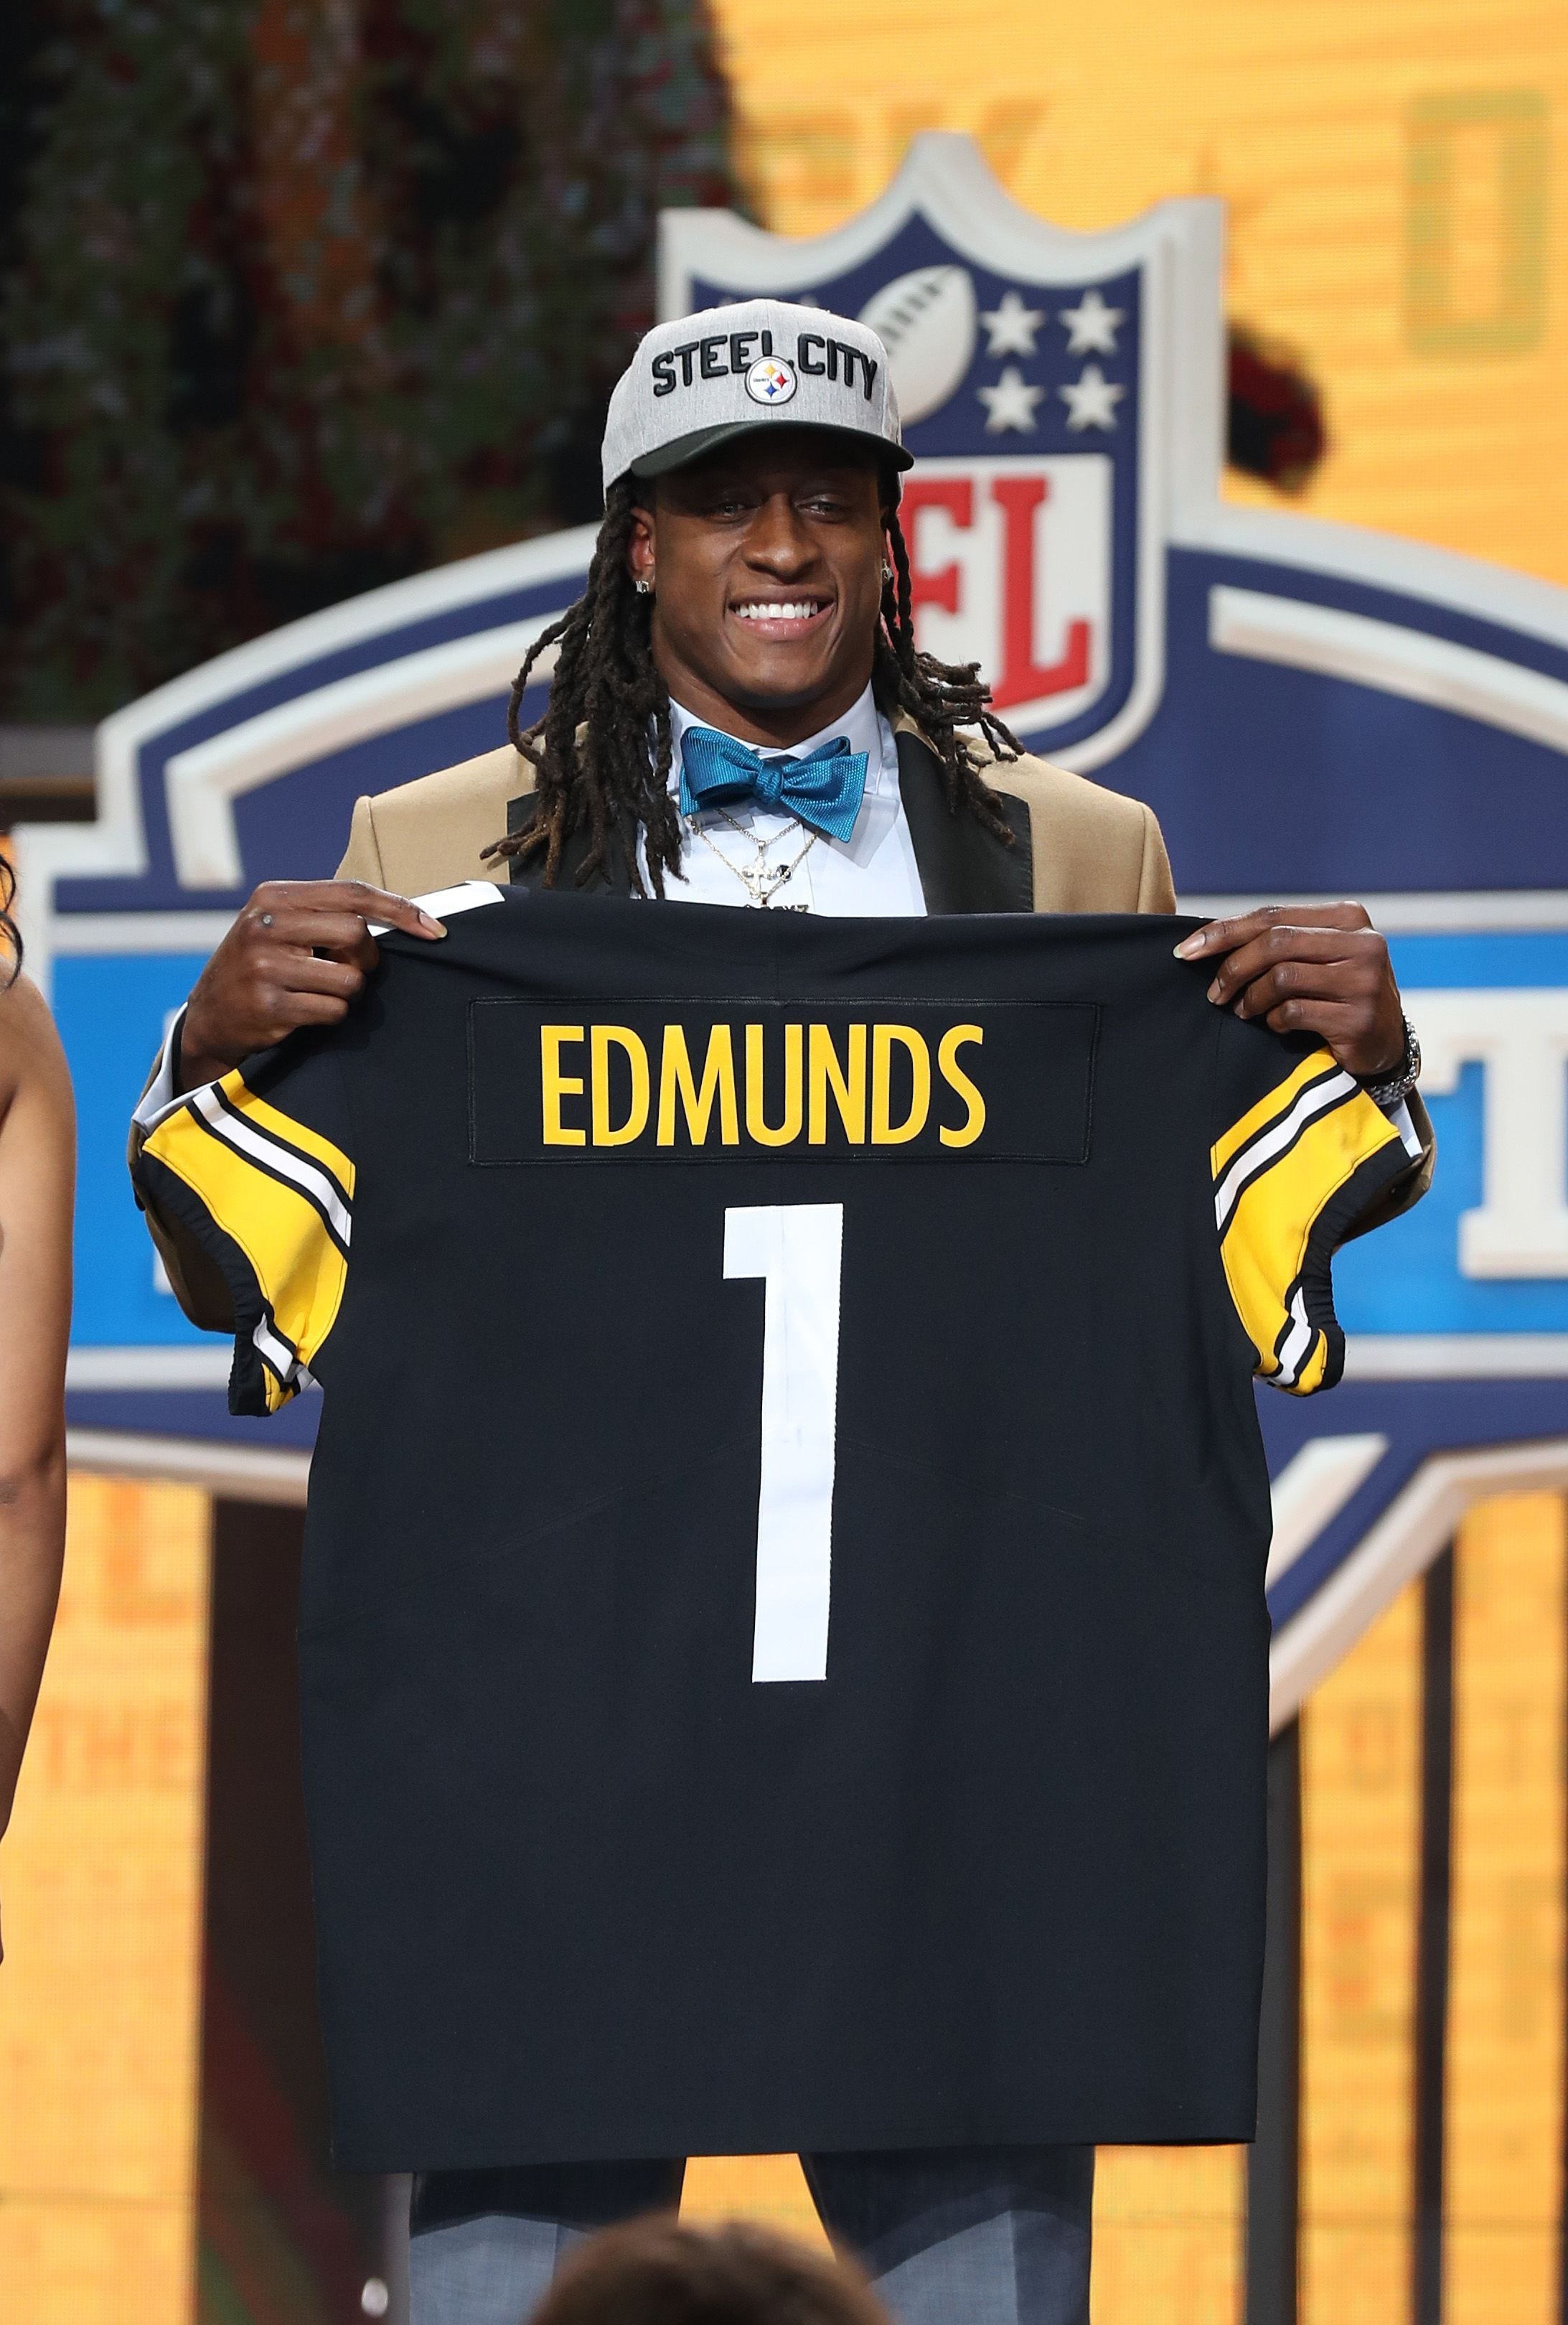 NFL draft winners, losers after first round: Steelers among teams who stumbled